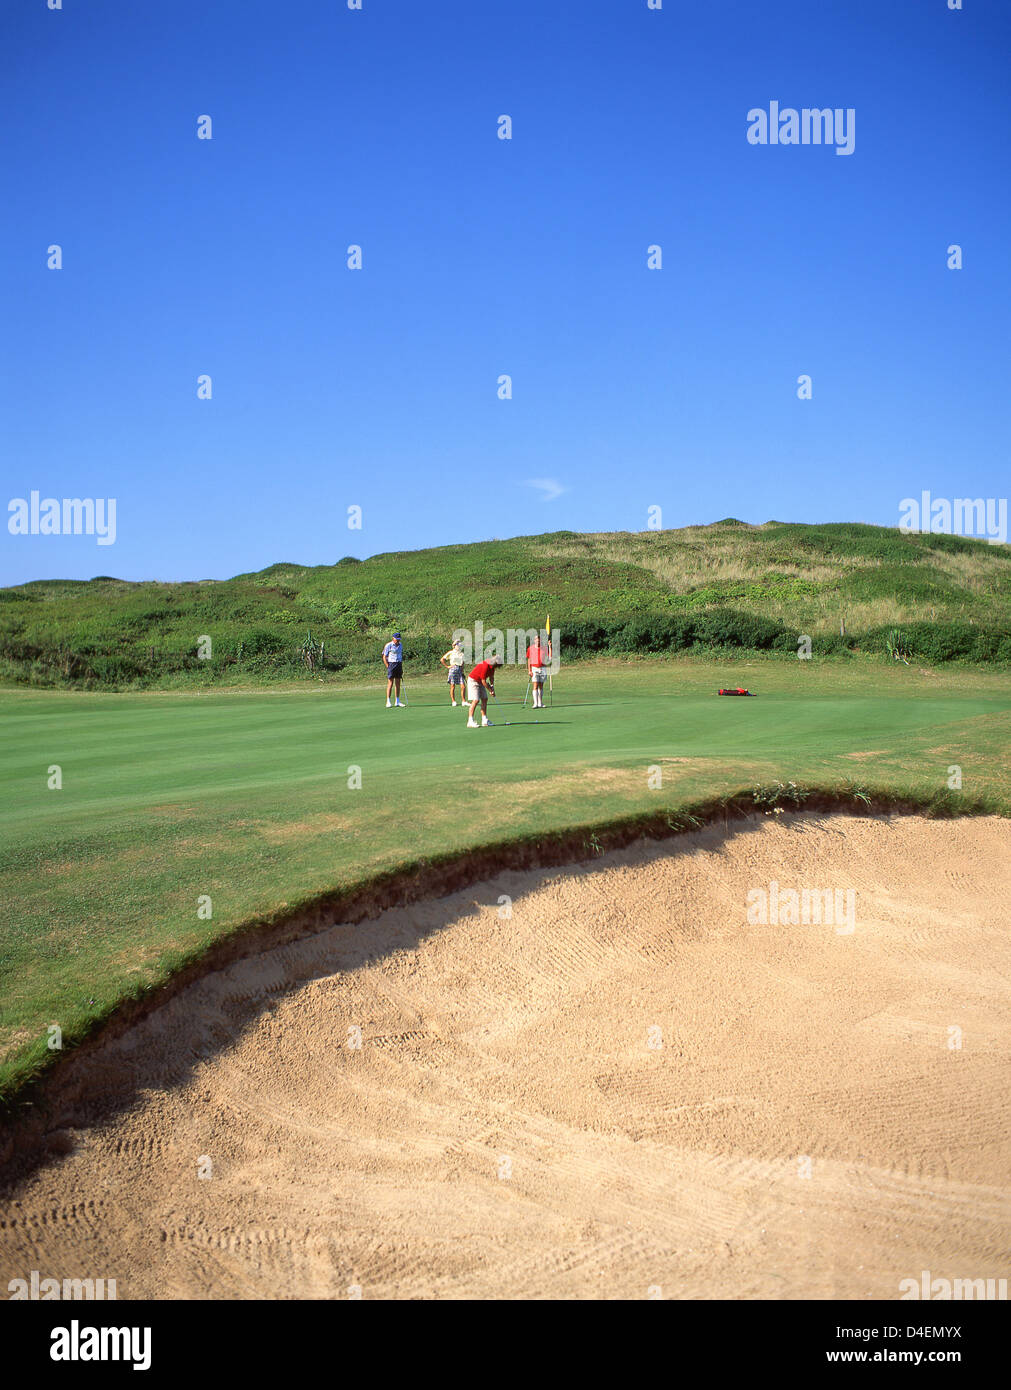 Les golfeurs sur le vert, Trevose Golf & Country Club, Constantine Bay, Padstow, Cornwall, Angleterre, Royaume-Uni Banque D'Images